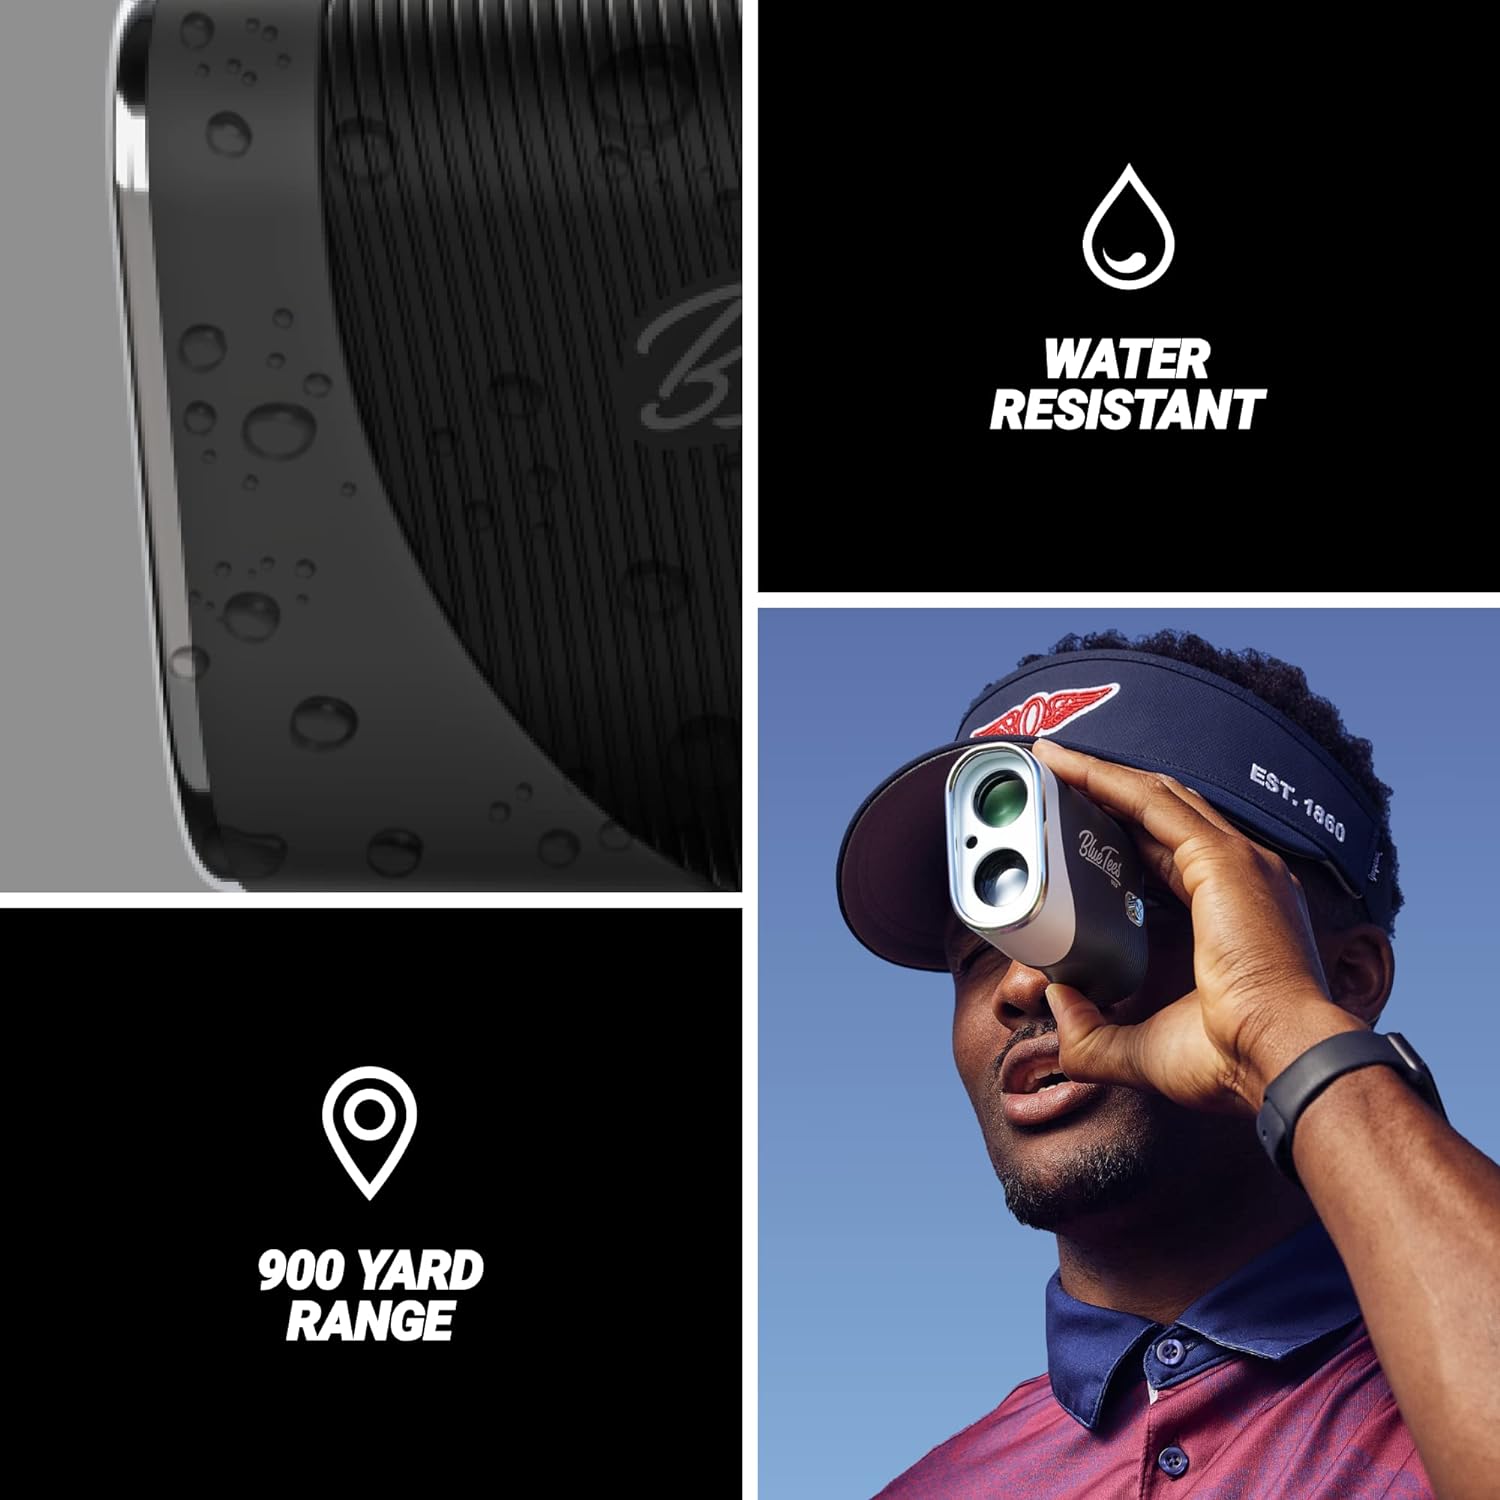 Blue Tees Golf - Series 3 Max with Laser Rangefinder with Slope Switch - 900 Yards Range, Slope Measurement, Magnetic Strip, Ambient Display, Flag Lock with Pulse Vibration, 7X Magnification - Black